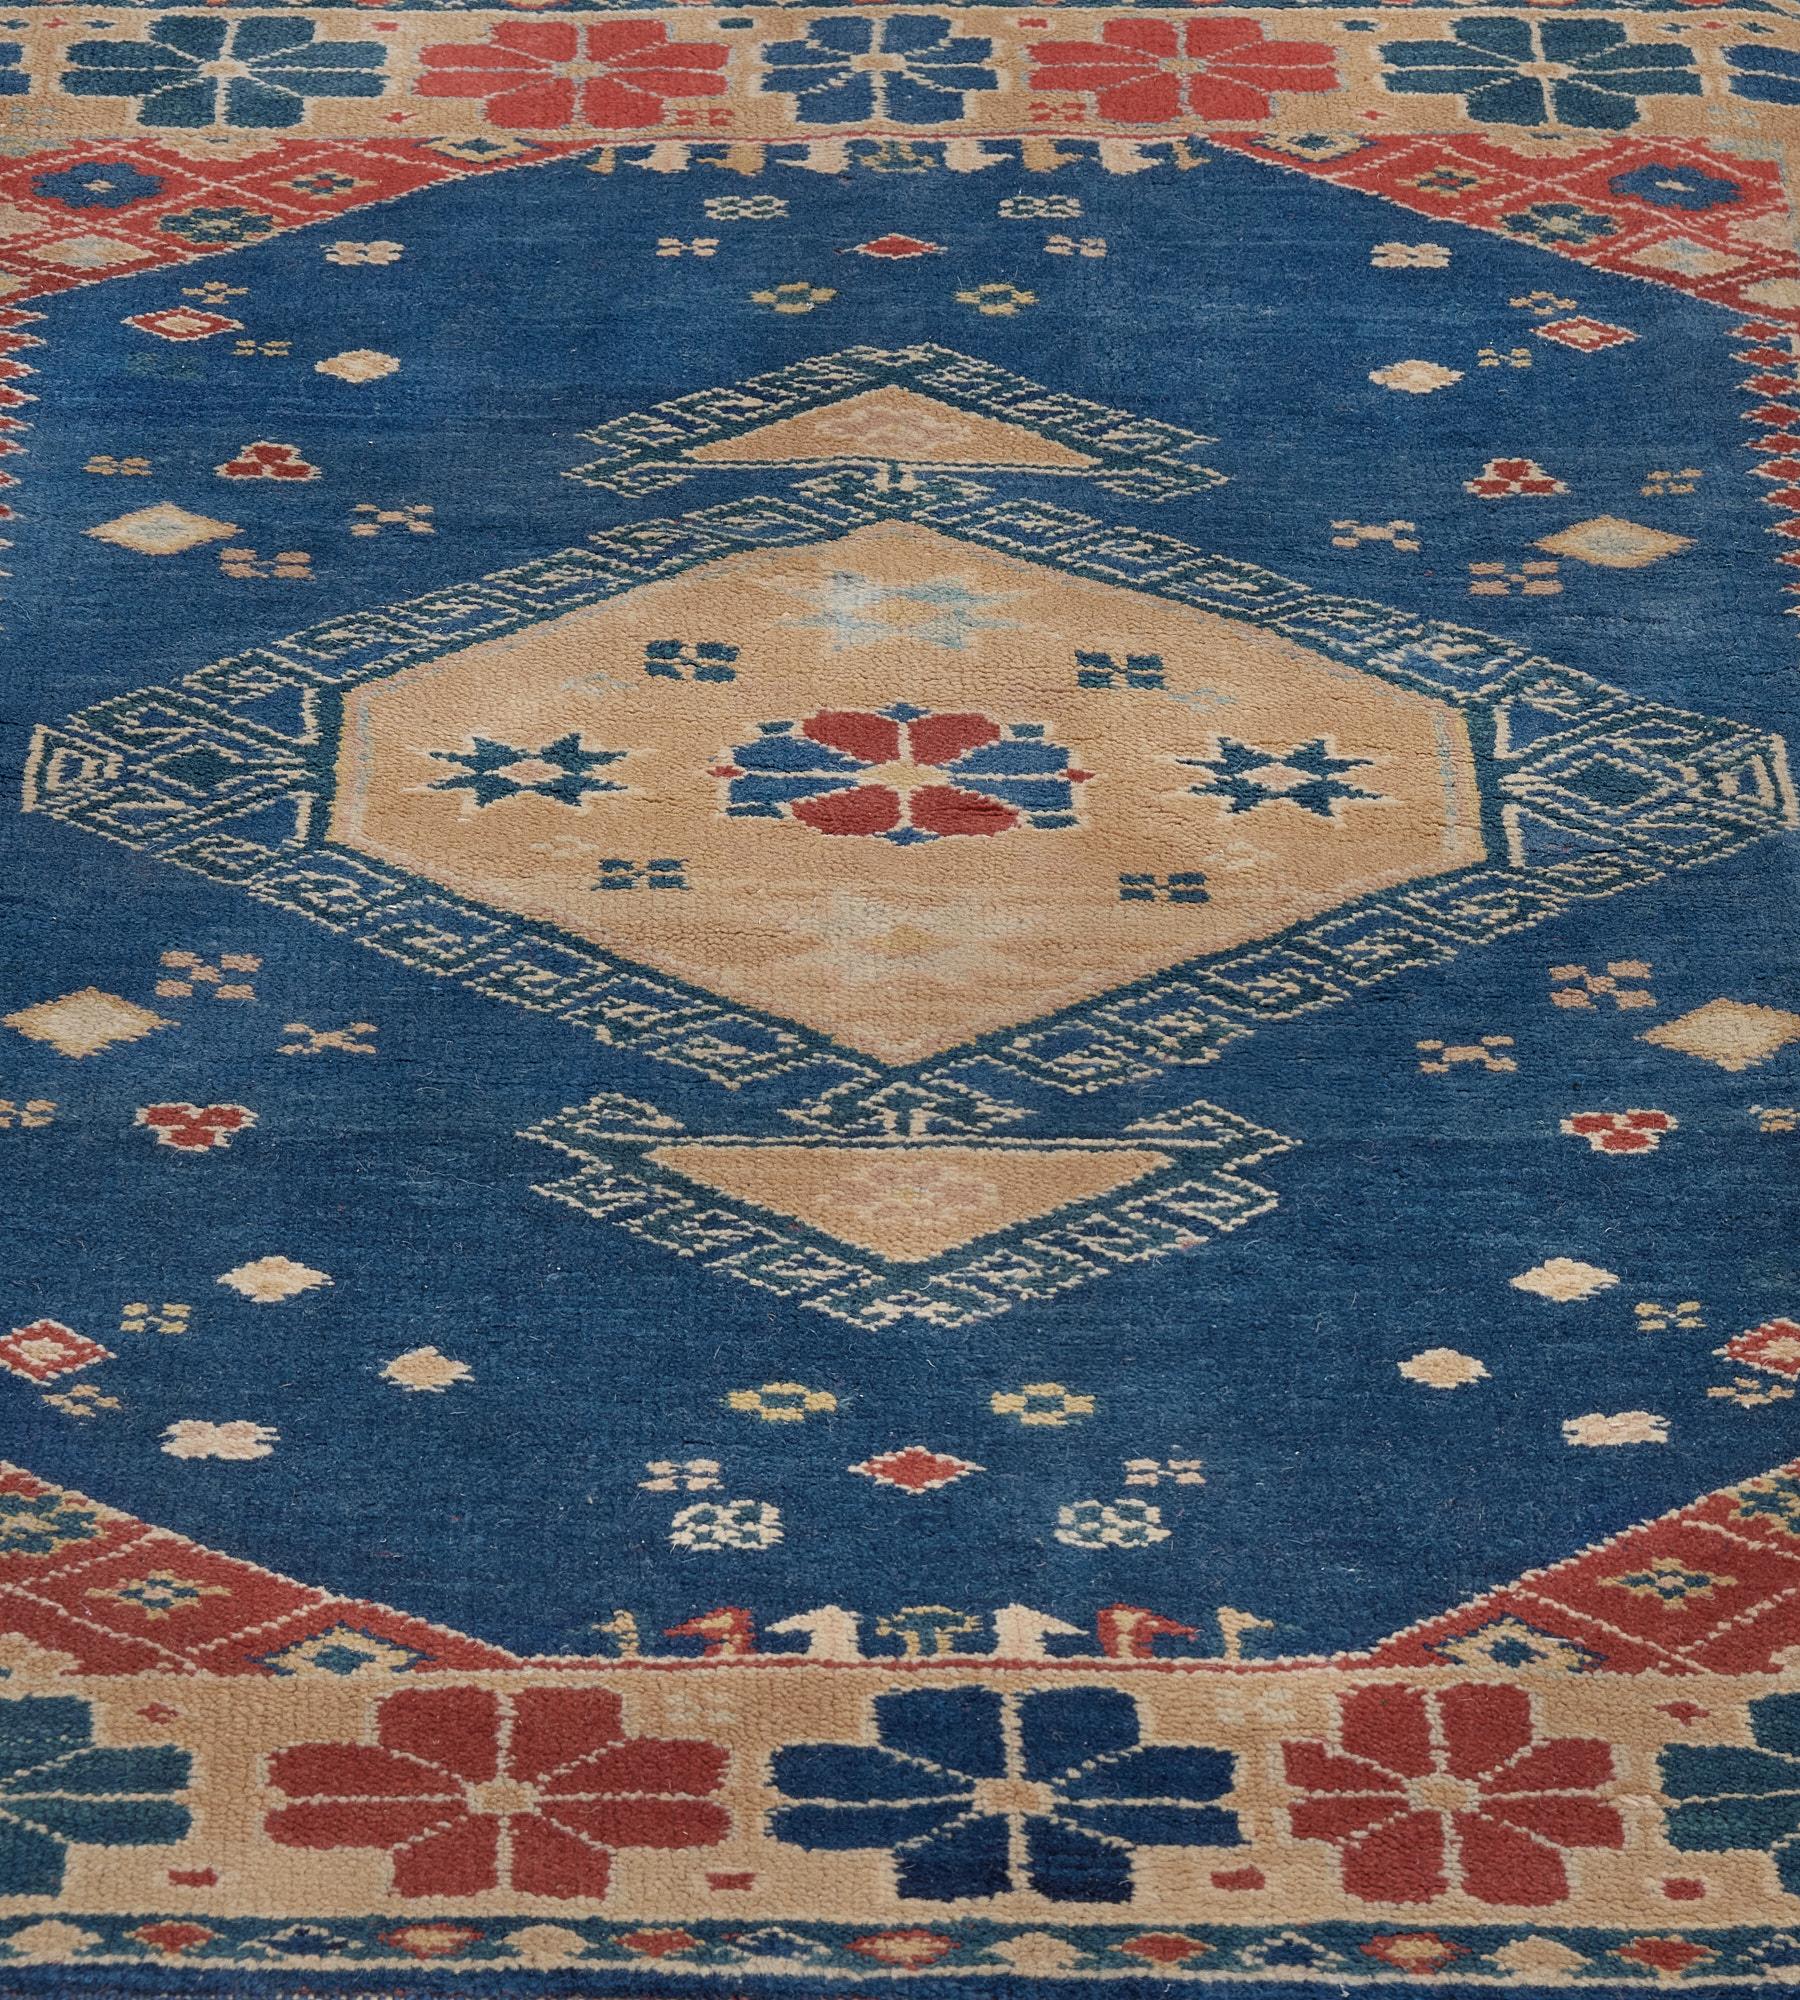 This traditional hand-woven Turkish rug has a deep blue field enclosing a central medallion surrounded by petit floral sprays, in a red and blue stylized floral border, with an outer blue stripe featuring polychrome diamonds.